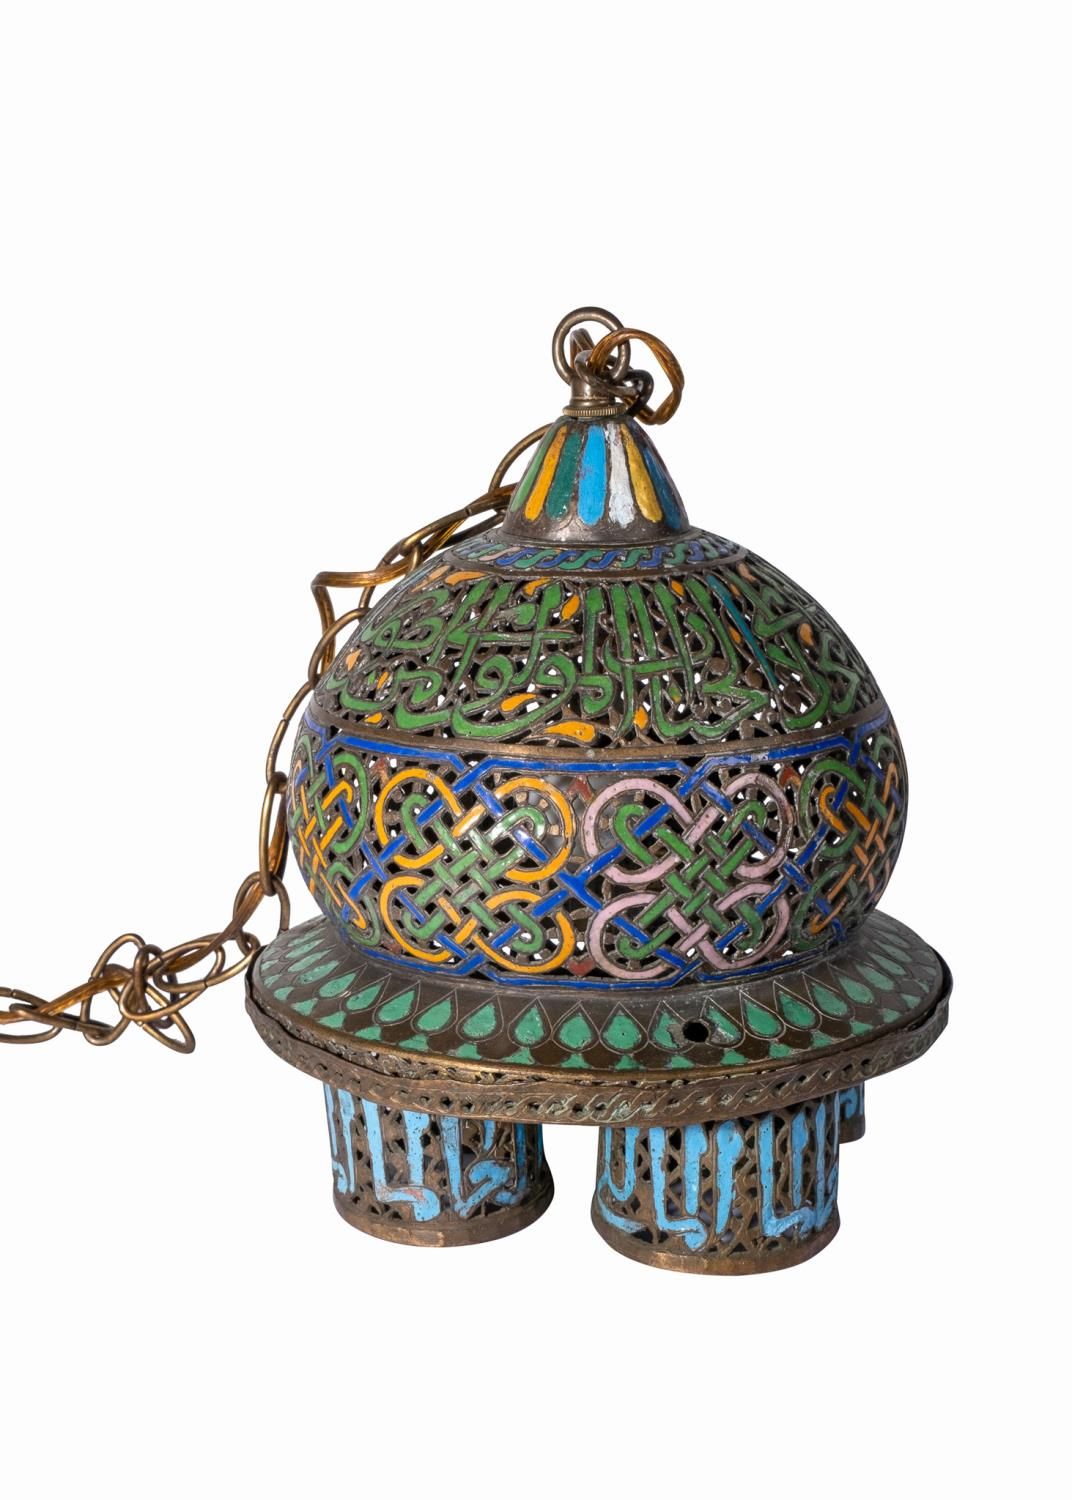 Null AN ENAMELLED HANGING LAMP, ANDALUSIA, 19TH/20TH CENTURY
 
 Kugelförmige For&hellip;